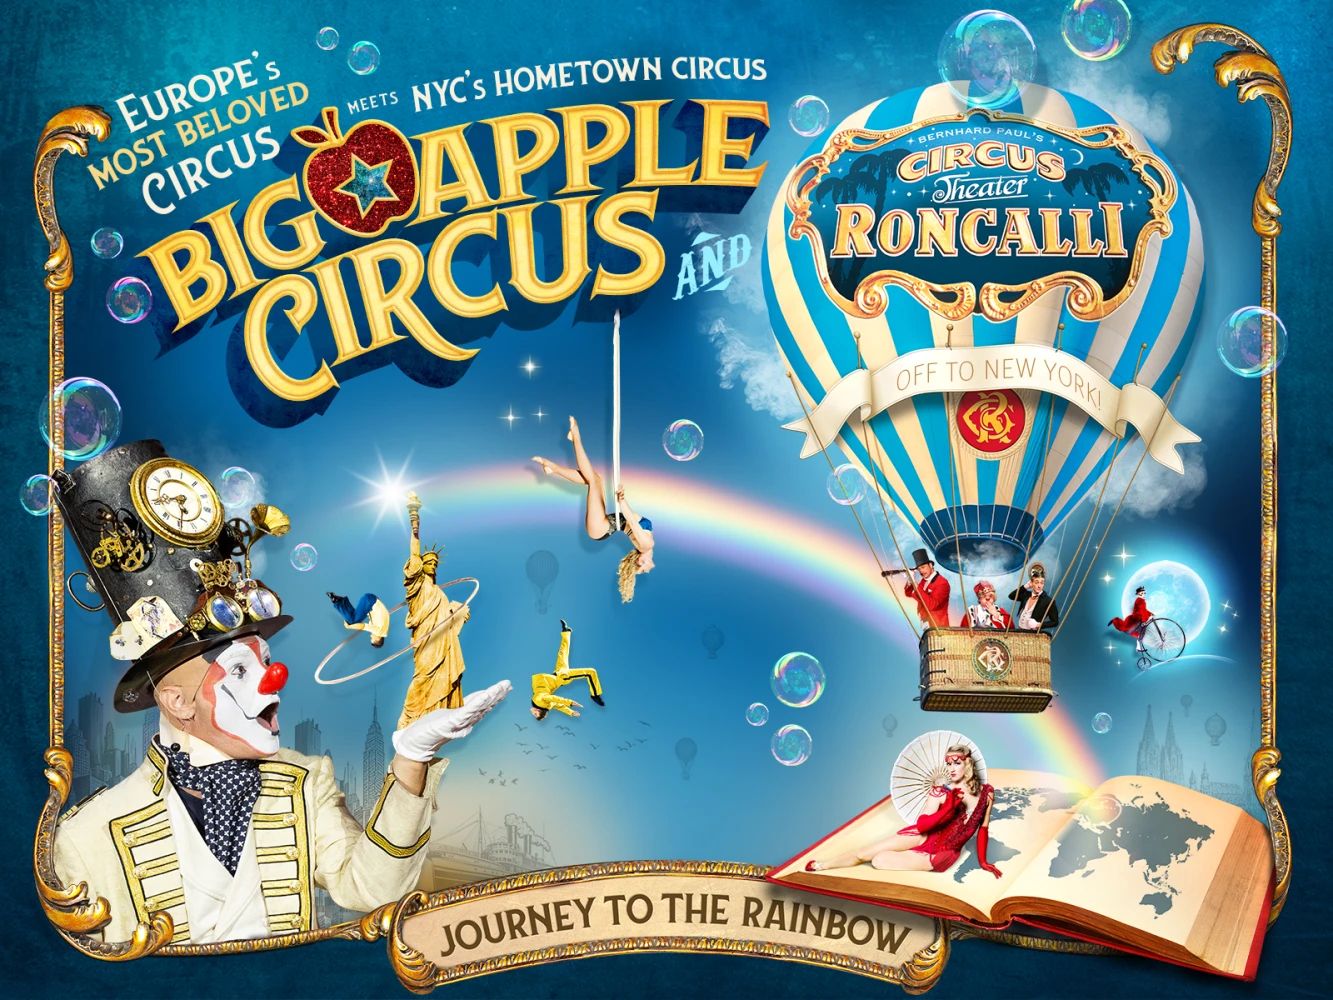 Big Apple Circus: What to expect - 10